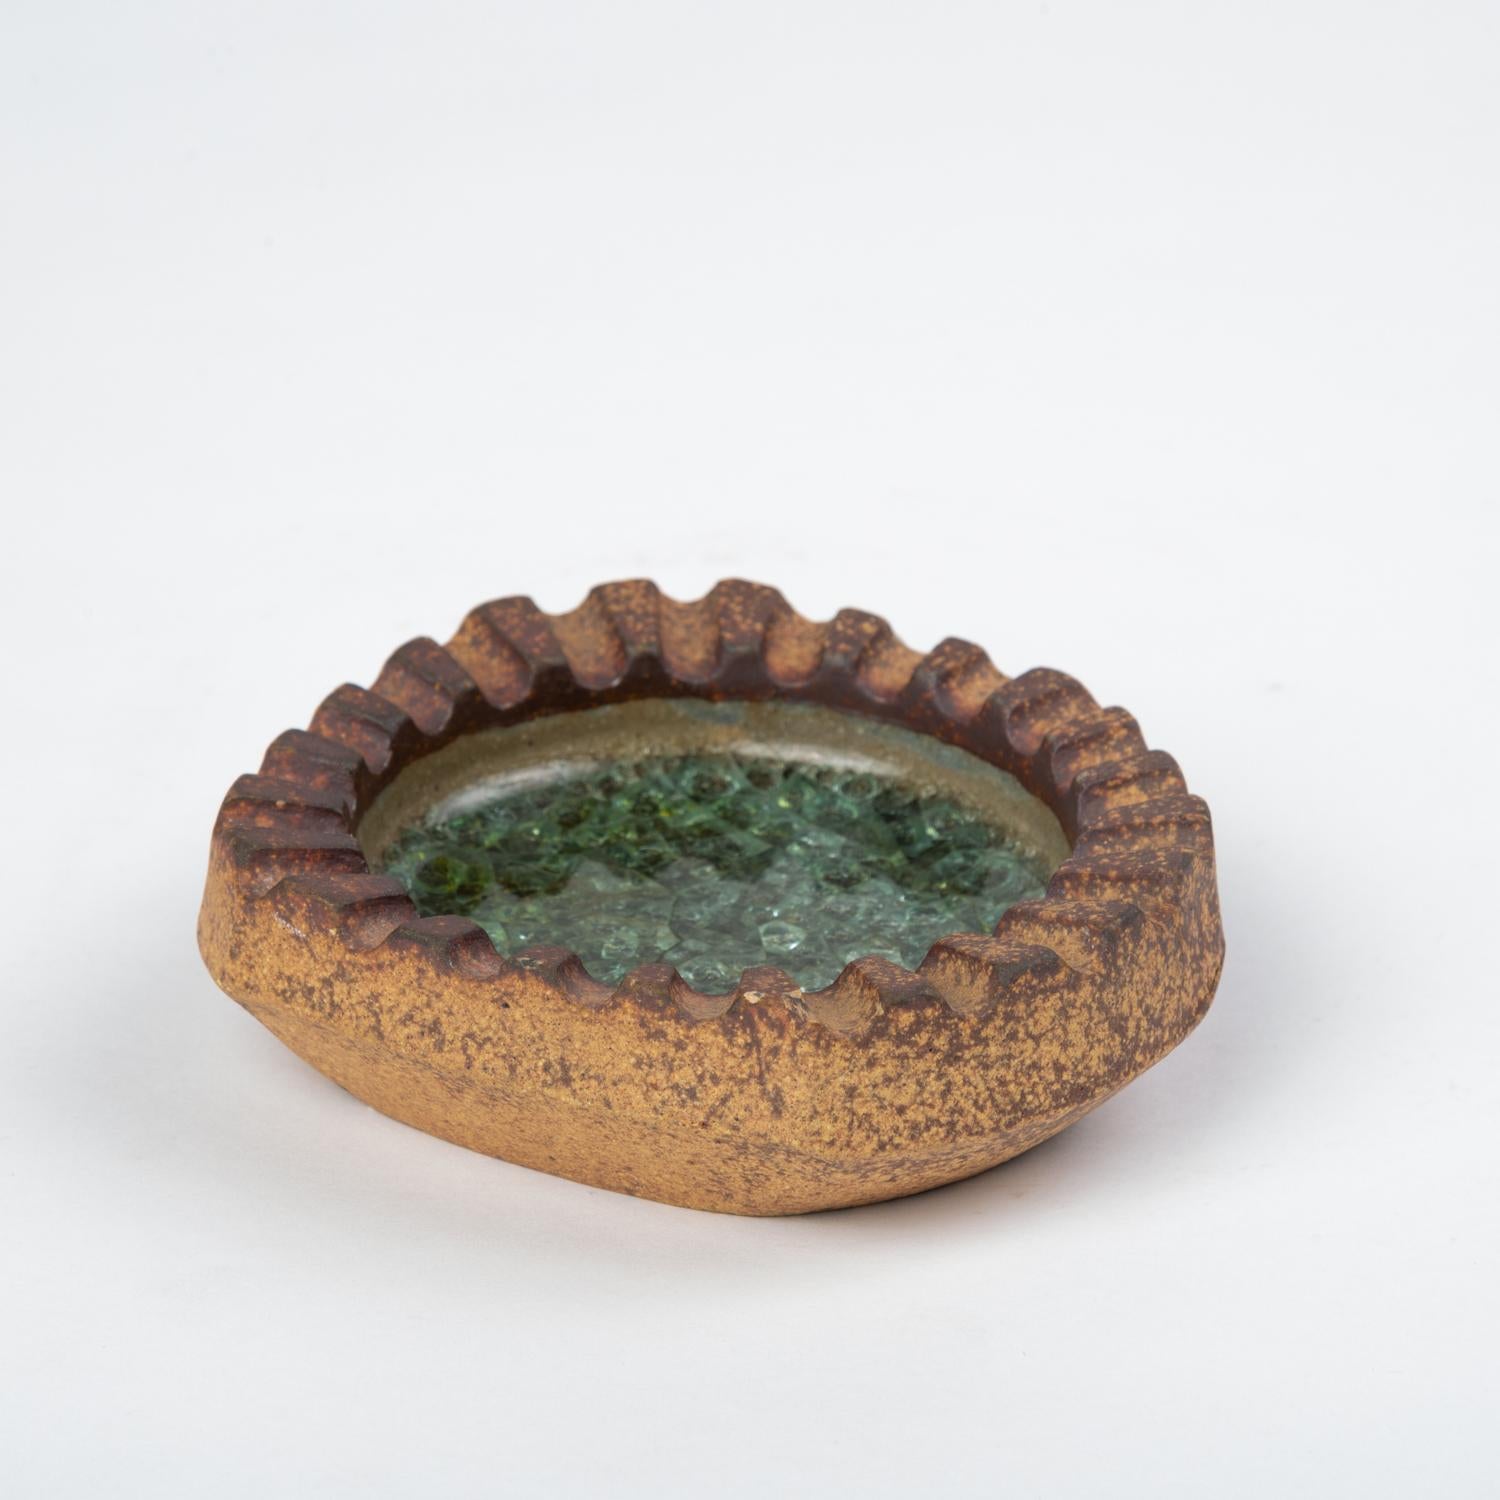 A small stoneware ashtray by renowned California art ceramicist Robert Maxwell with an irregular, crenellated edge and distinctive glazework. The body of the piece is unfinished stoneware, with layered glaze around the interior. The bottom of the